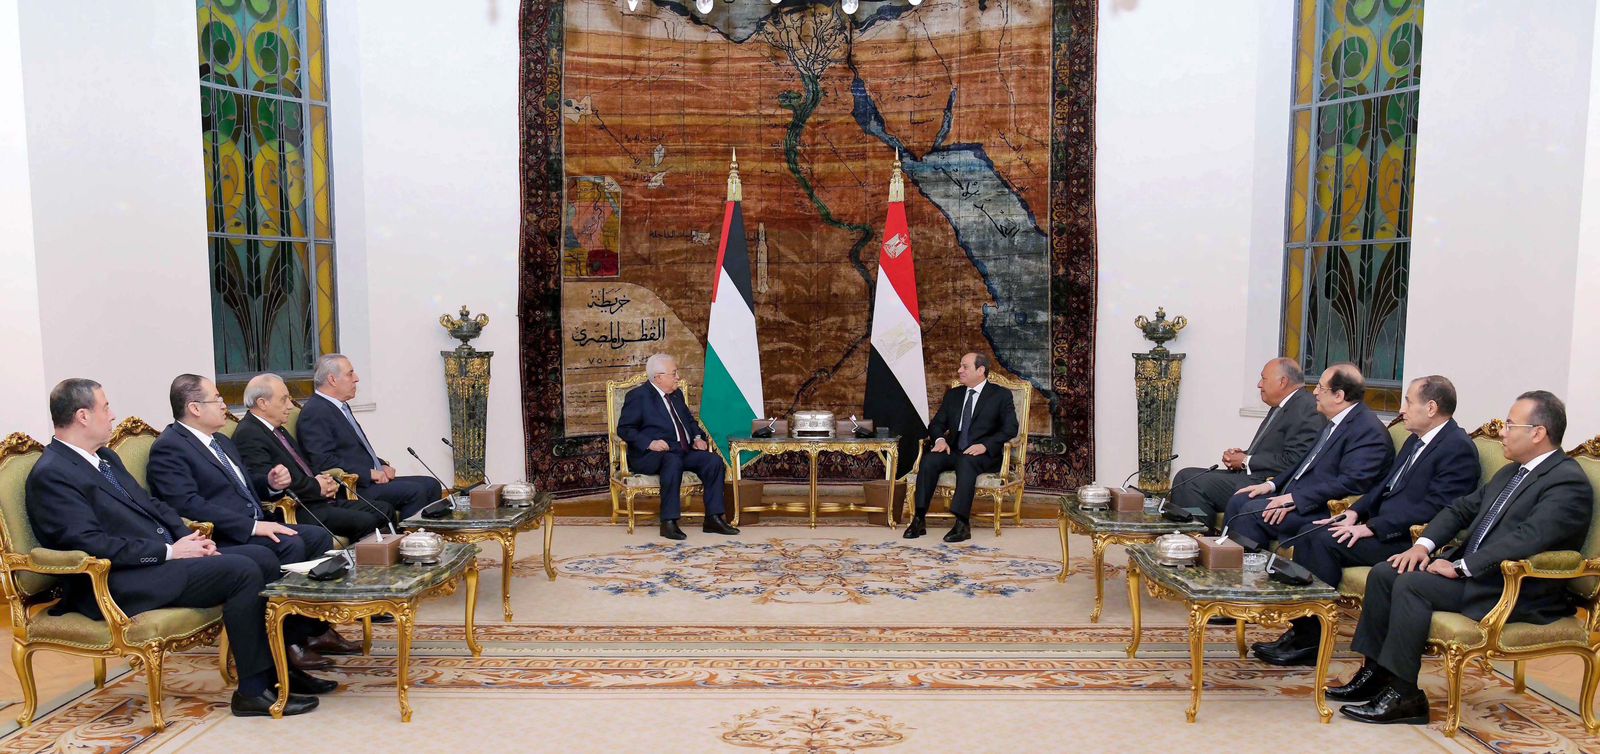 An expanded discussion session between President Sisi and his Palestinian counterpart about the situation in Gaza